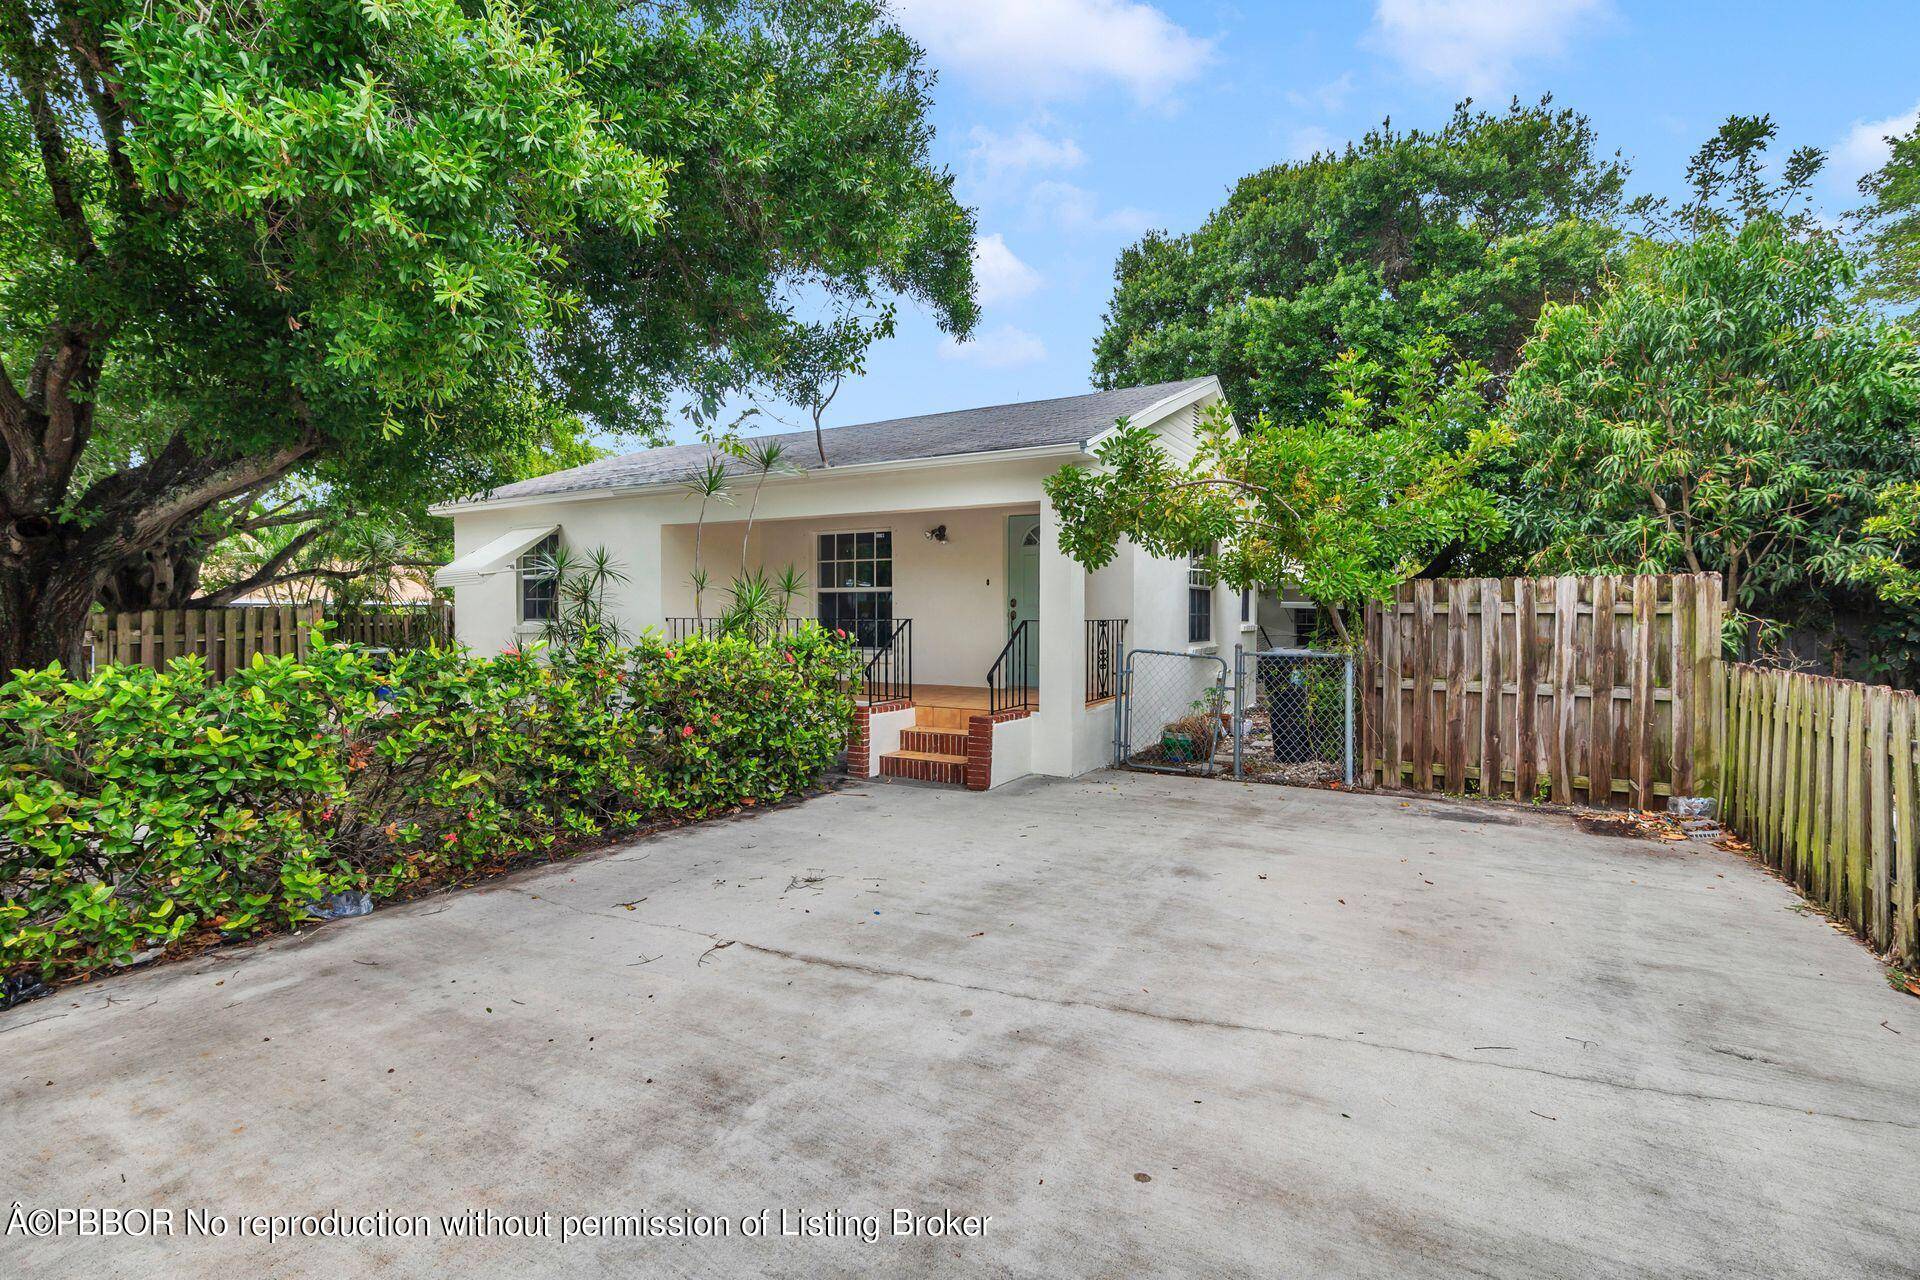 VERY CUTE AND PRIVATE HOME WITH PRIVATE COURTYARD IN THE BACK OF THIS TRIPLEX.